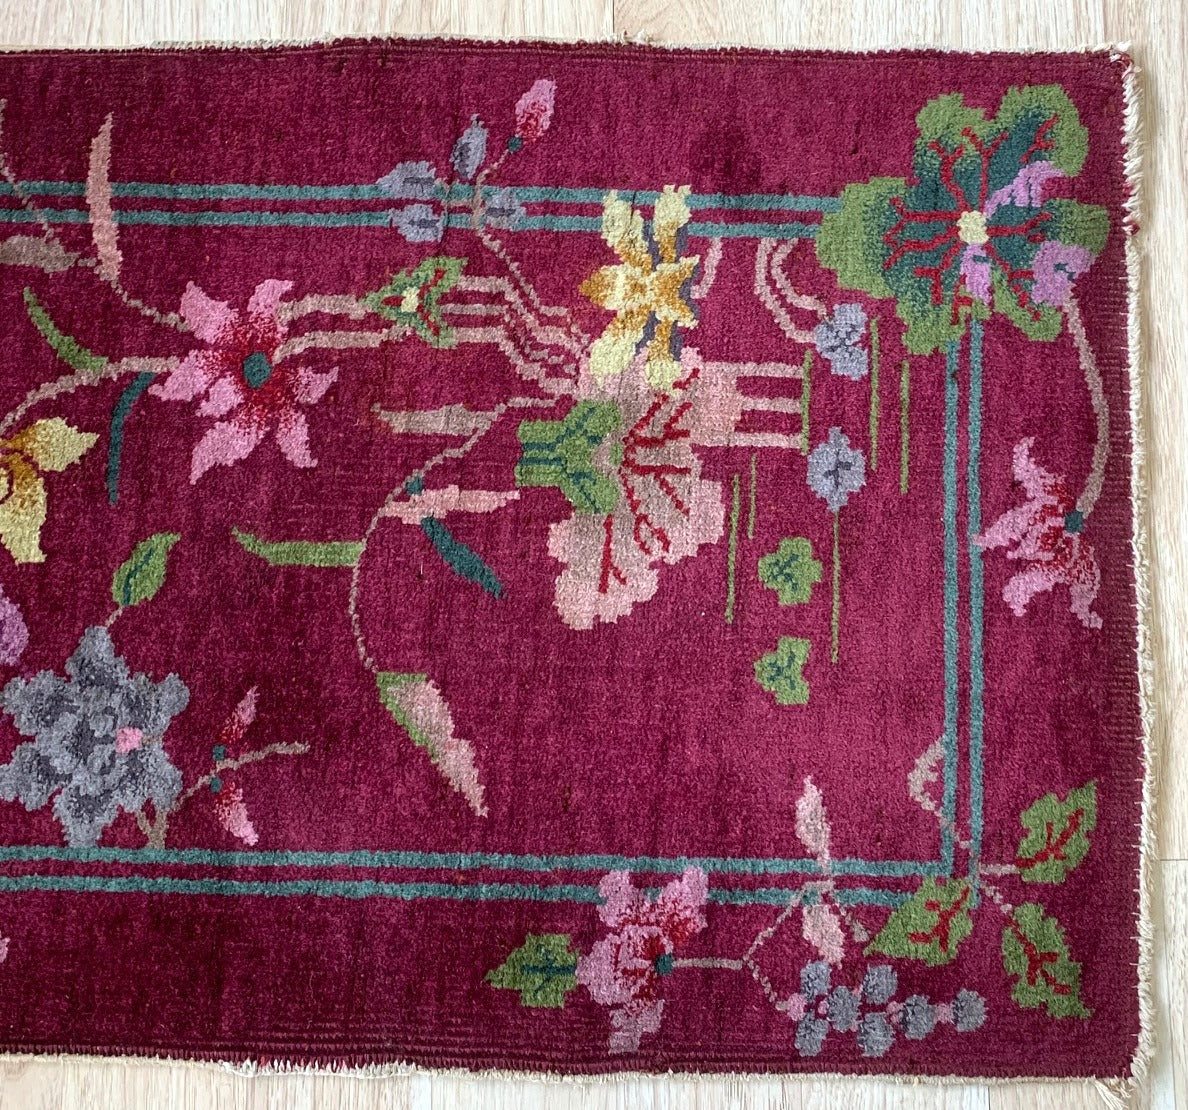 Handmade antique Art Deco Chinese rug in burgundy color. The rug is from the beginning of 20th century in original good condition.